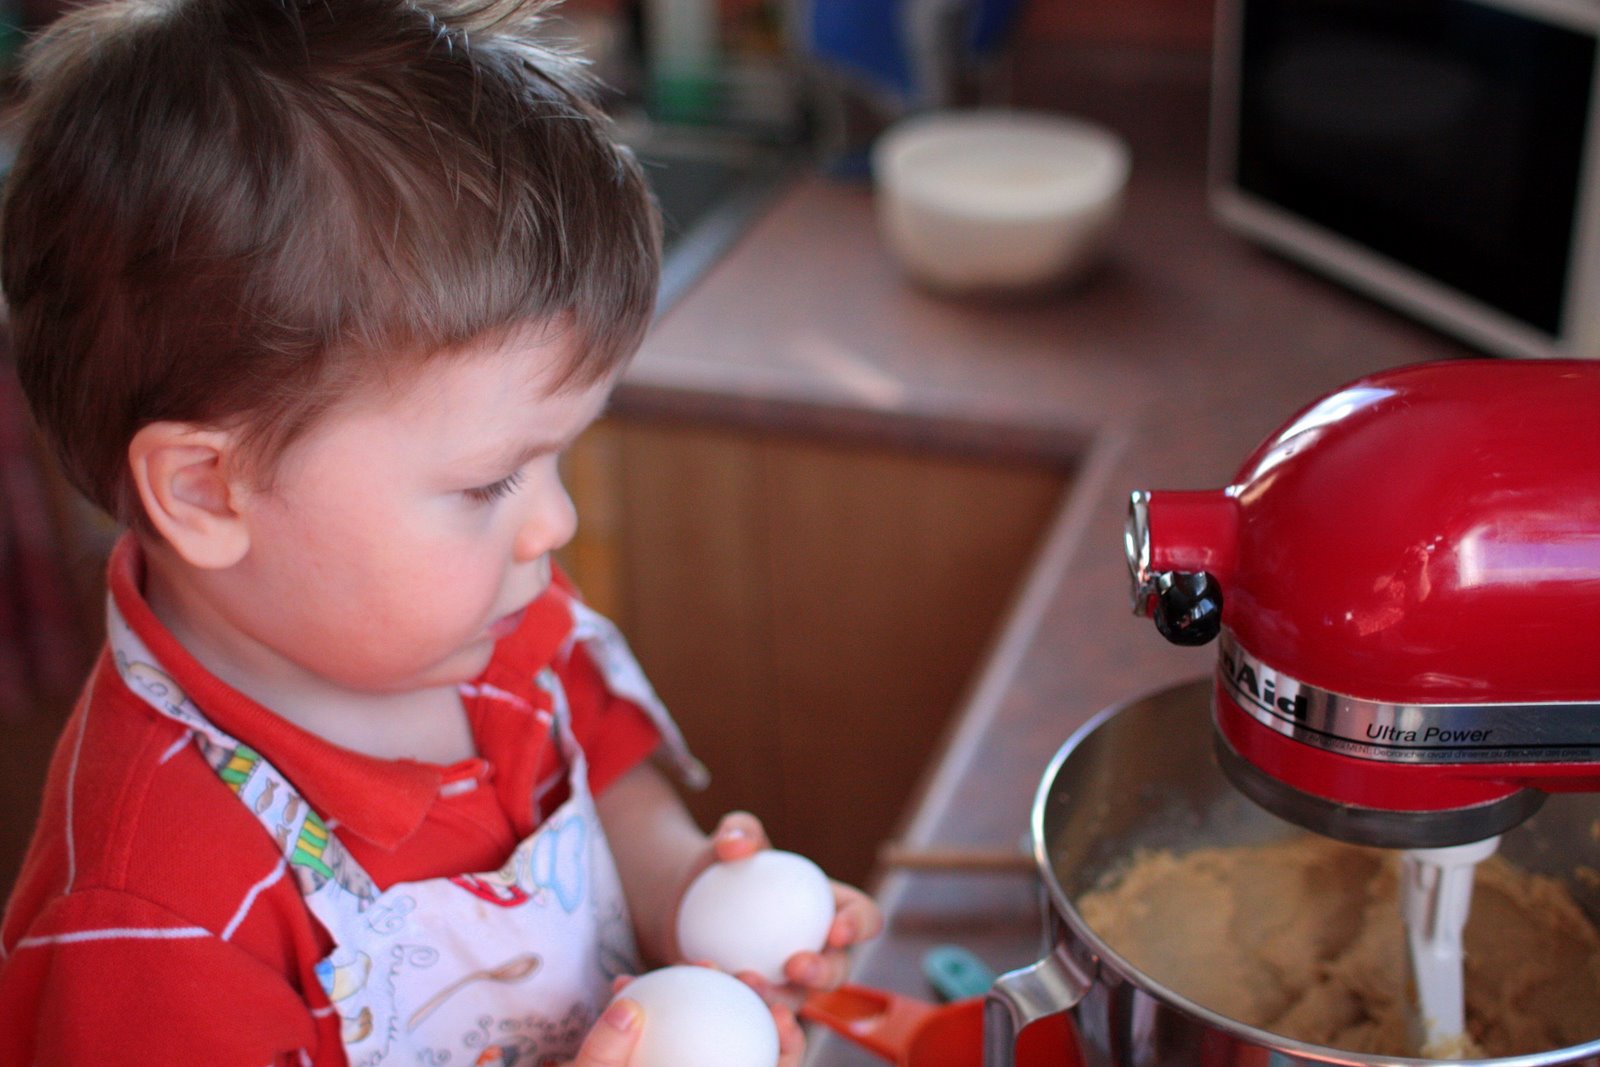 Today On Simple Mom: Cooking with Kids